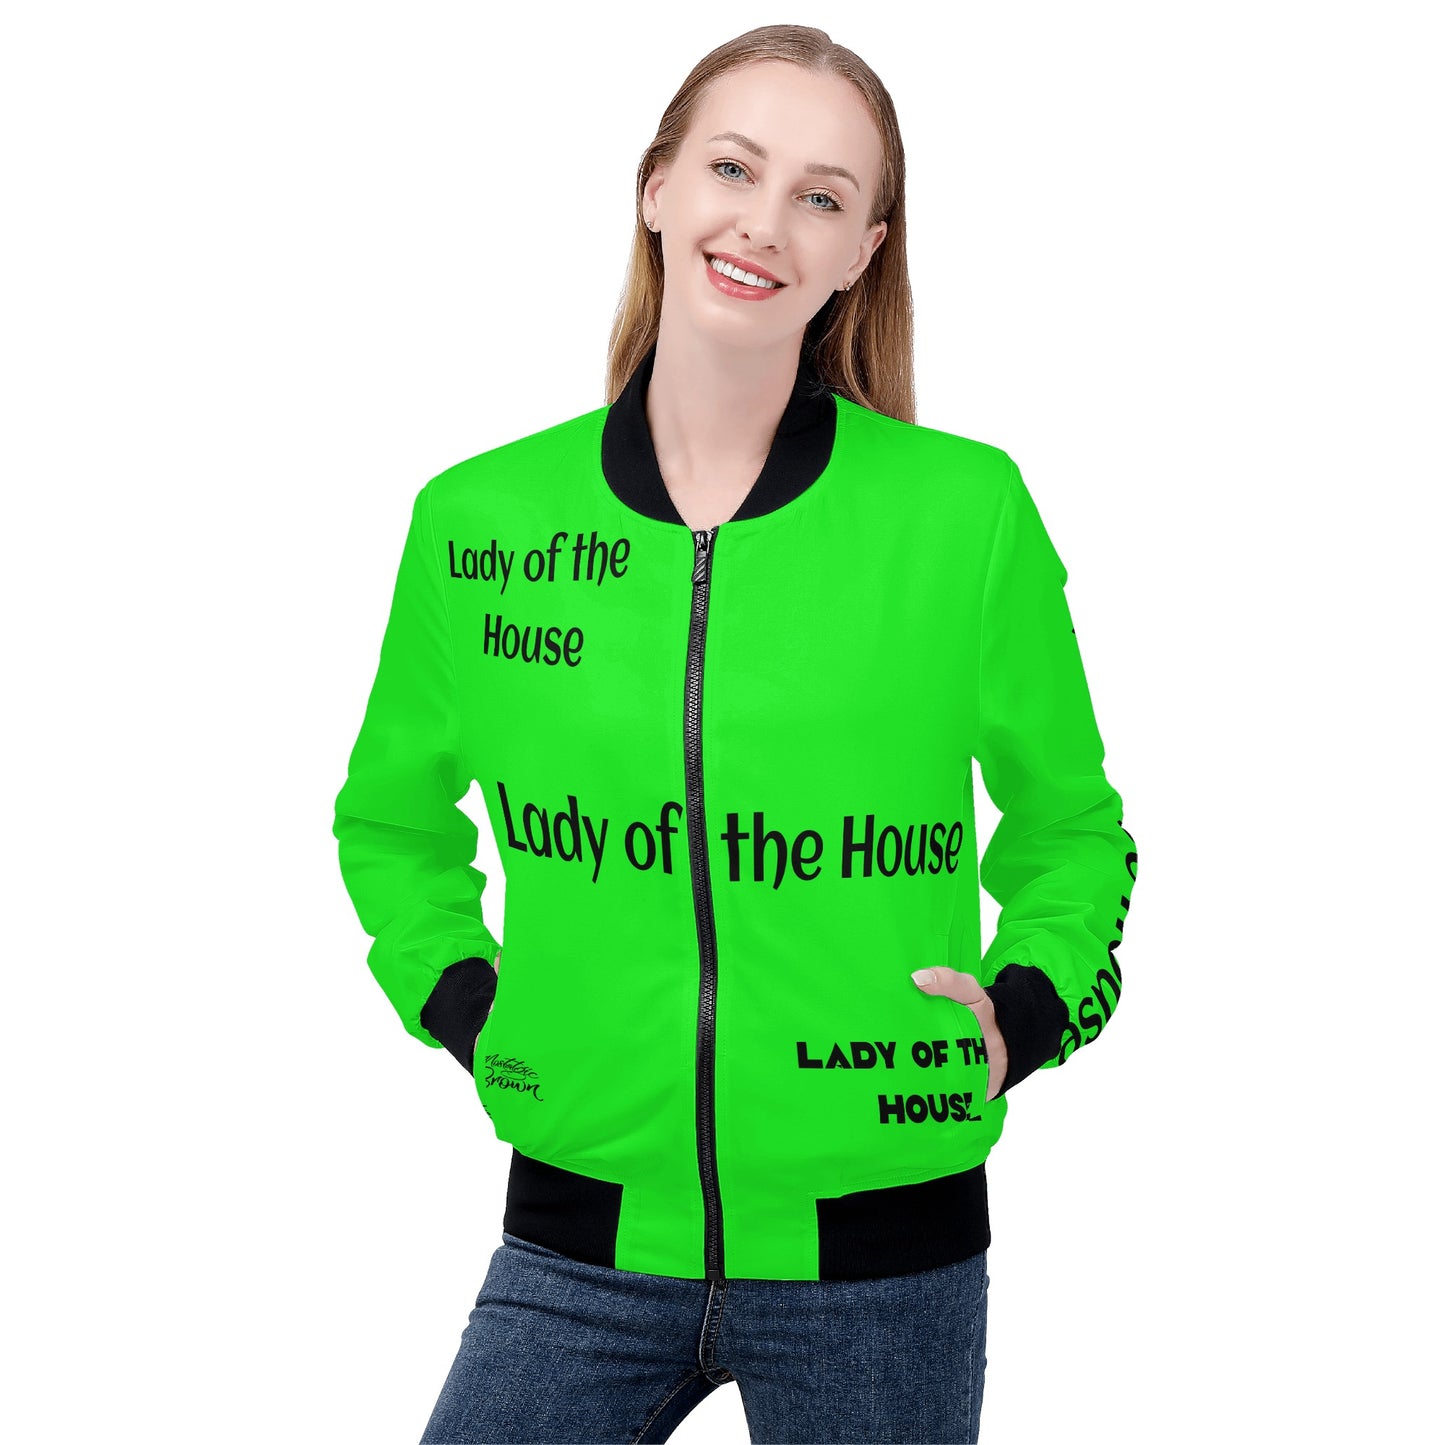 Lady of The House Womens Bomber Jacket